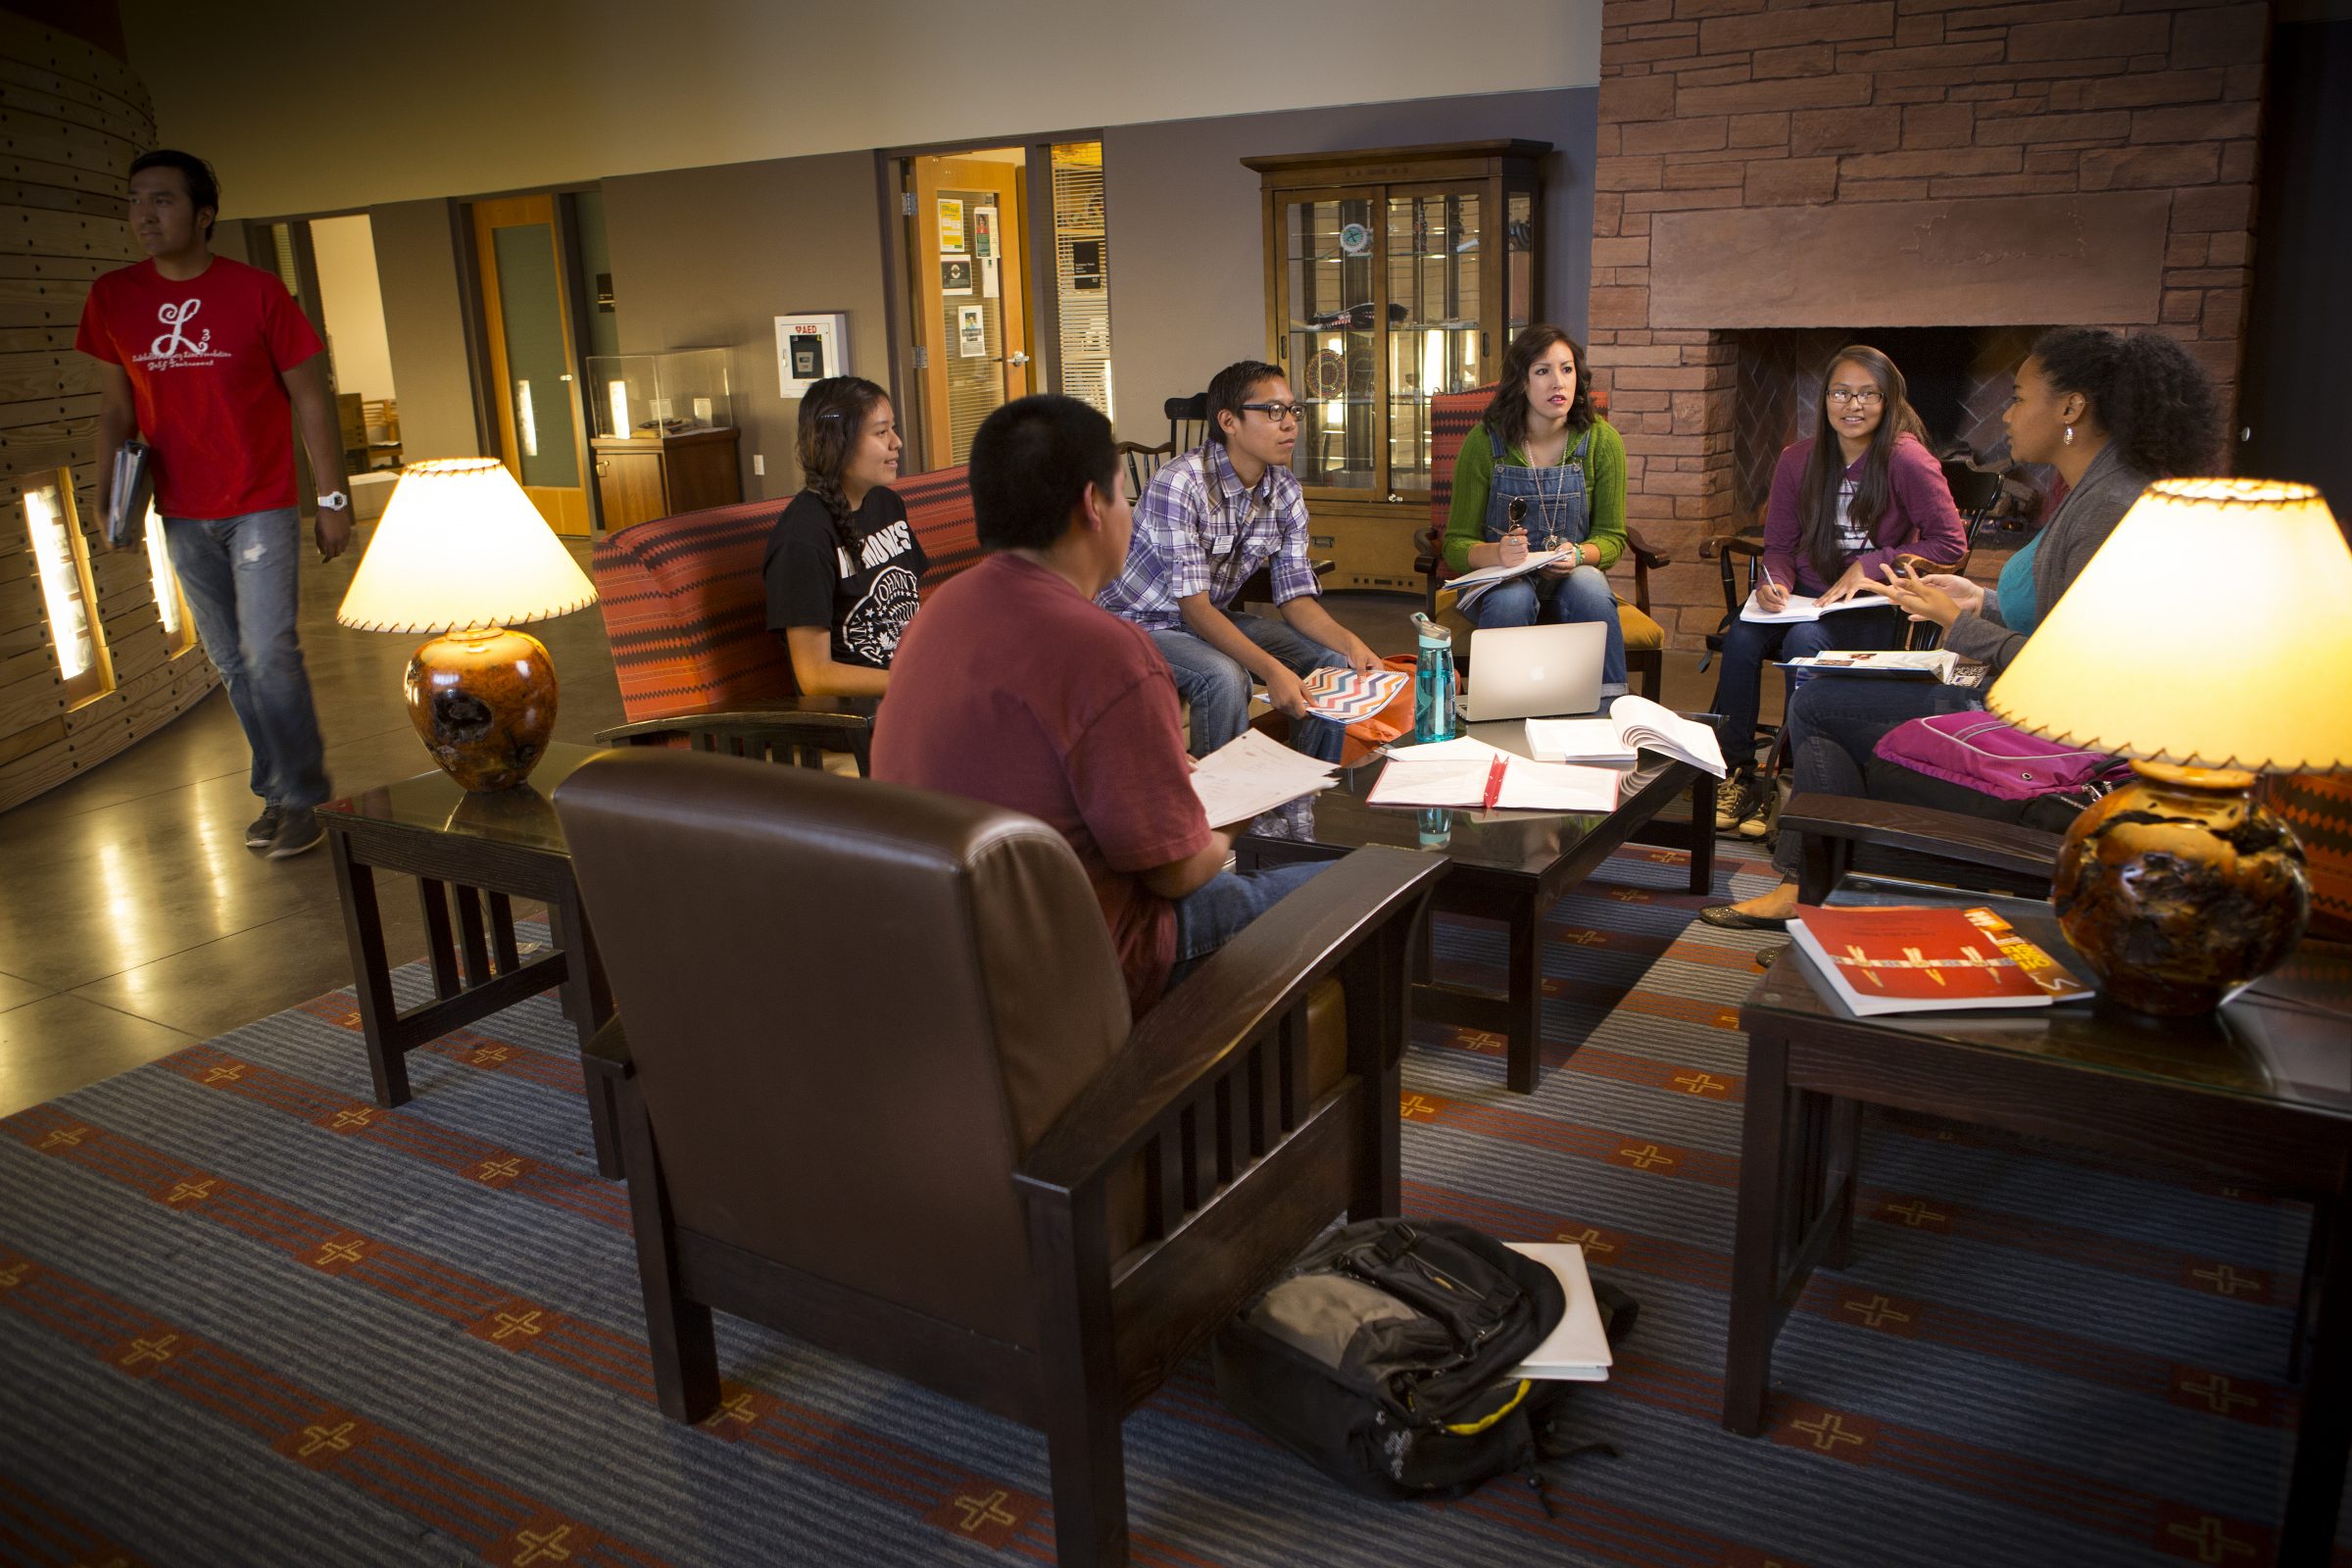 Students sitting in a hotel lobby discussing textbooks.